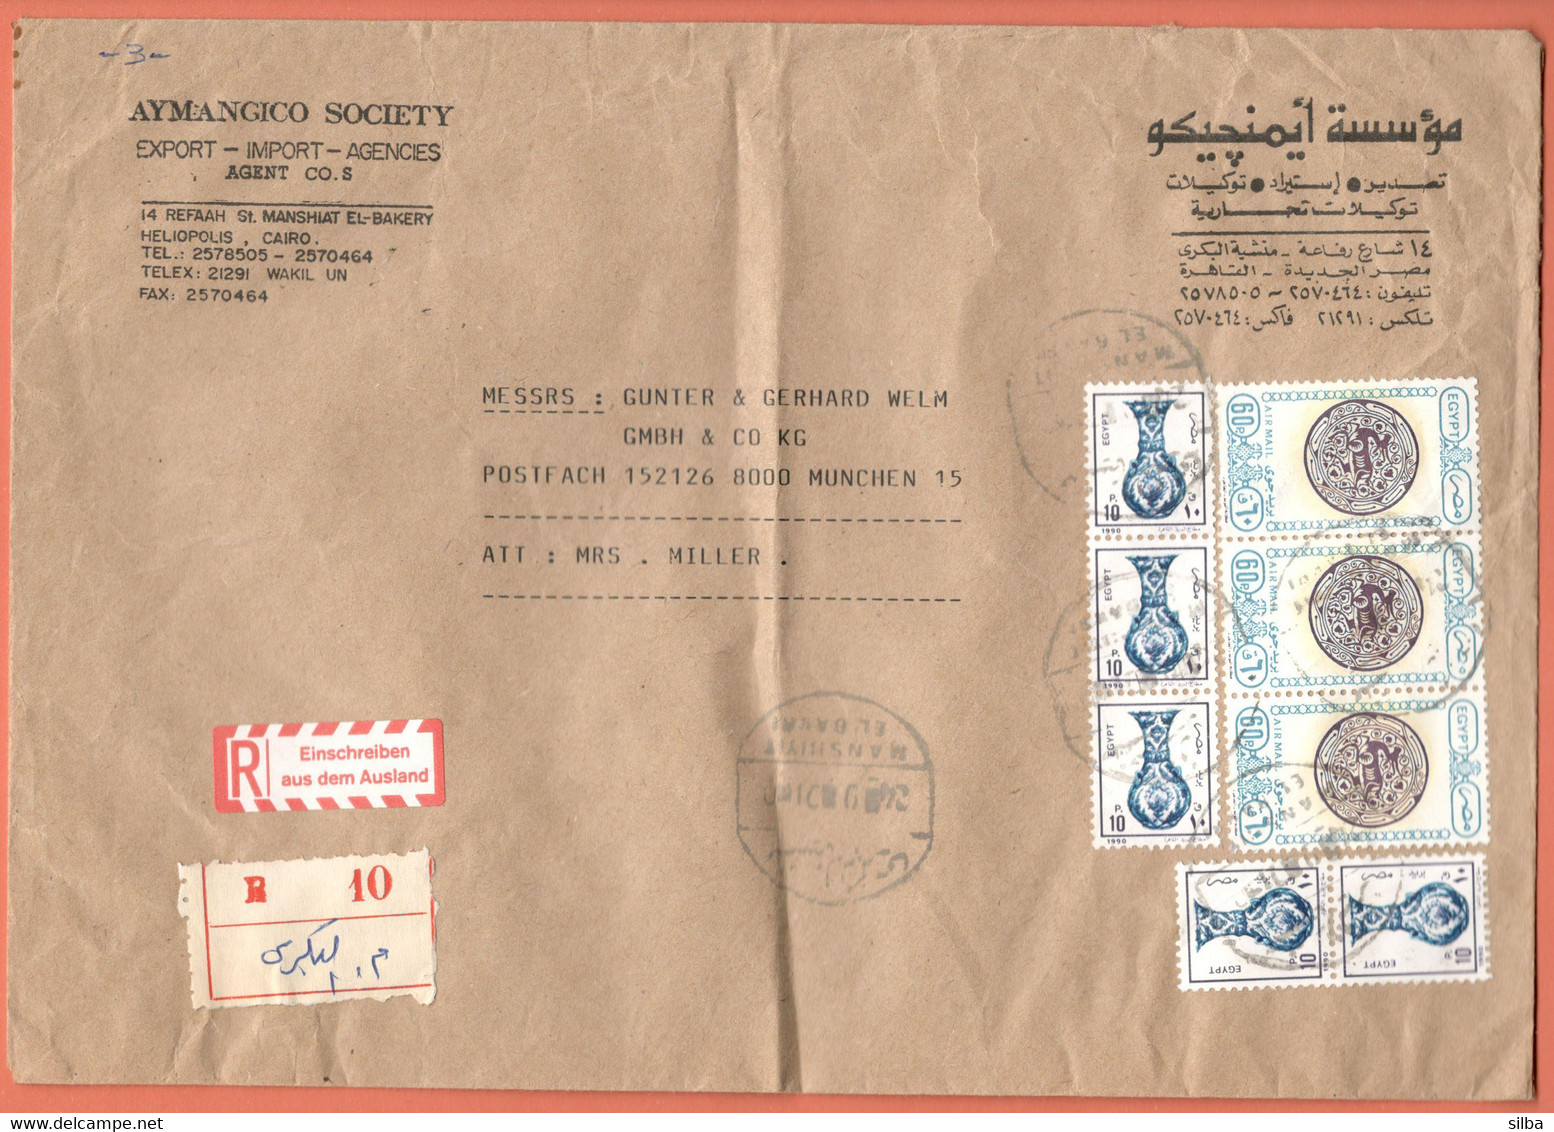 Egypt / Airmail - Art And Mosques, Dish With Gazelle Motif - 60 P, Vase 10 P, 1990 - Covers & Documents